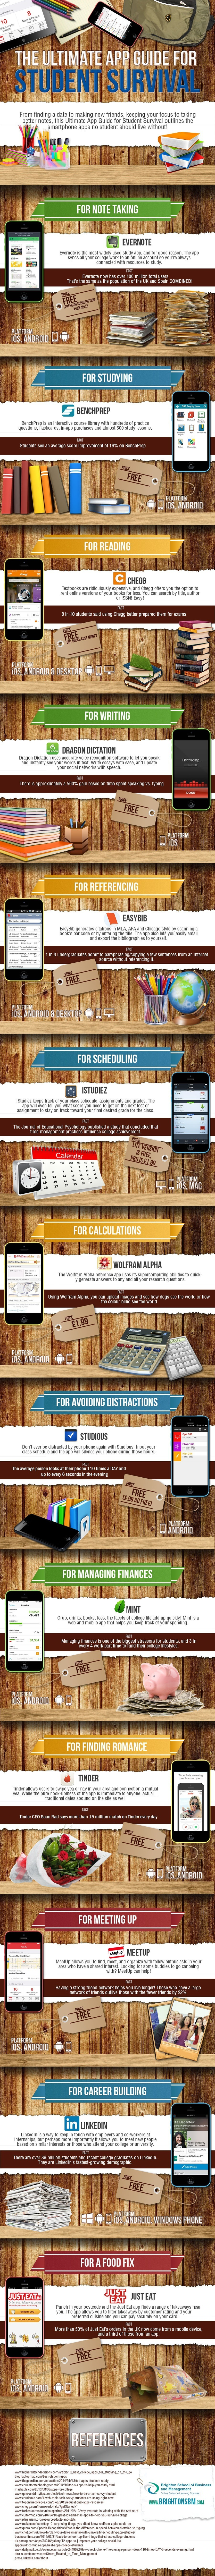 Top Apps For College Student Survival Infographic